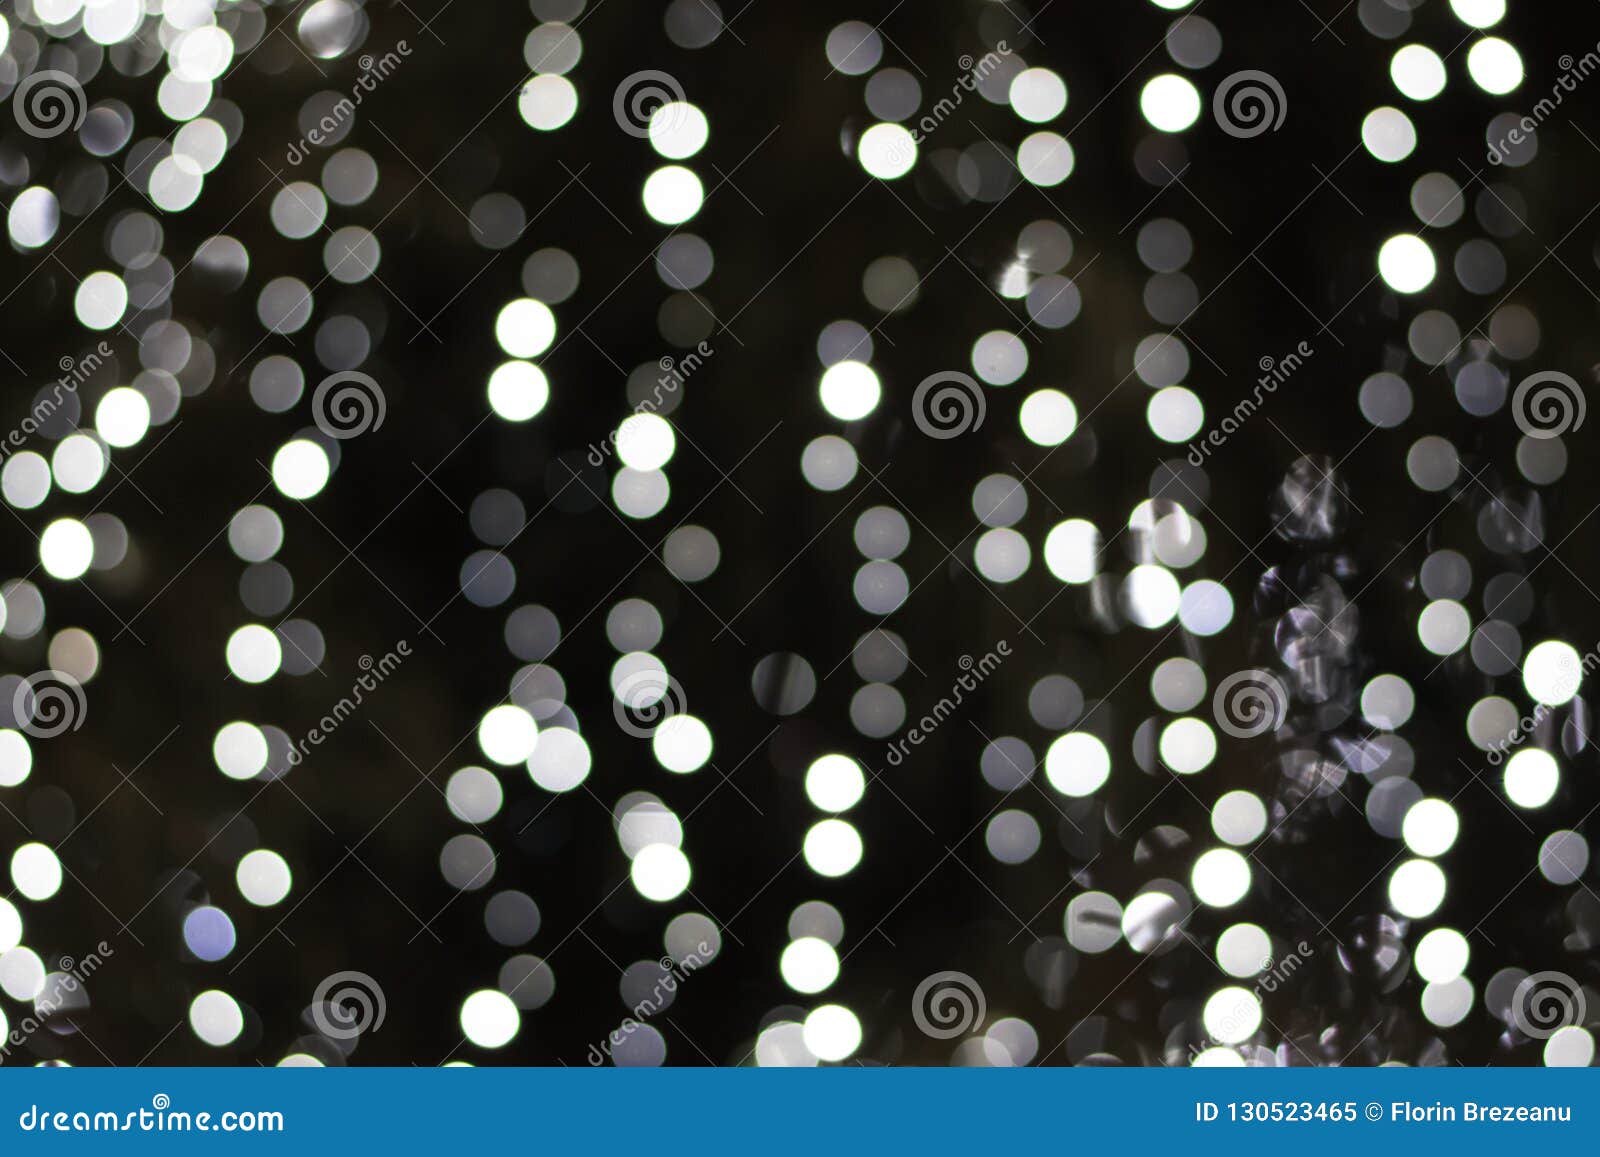 Silver and White Lights Bokeh Background. Blurry Background of Silver and  White Dots Lights Stock Image - Image of glamour, disco: 130523465